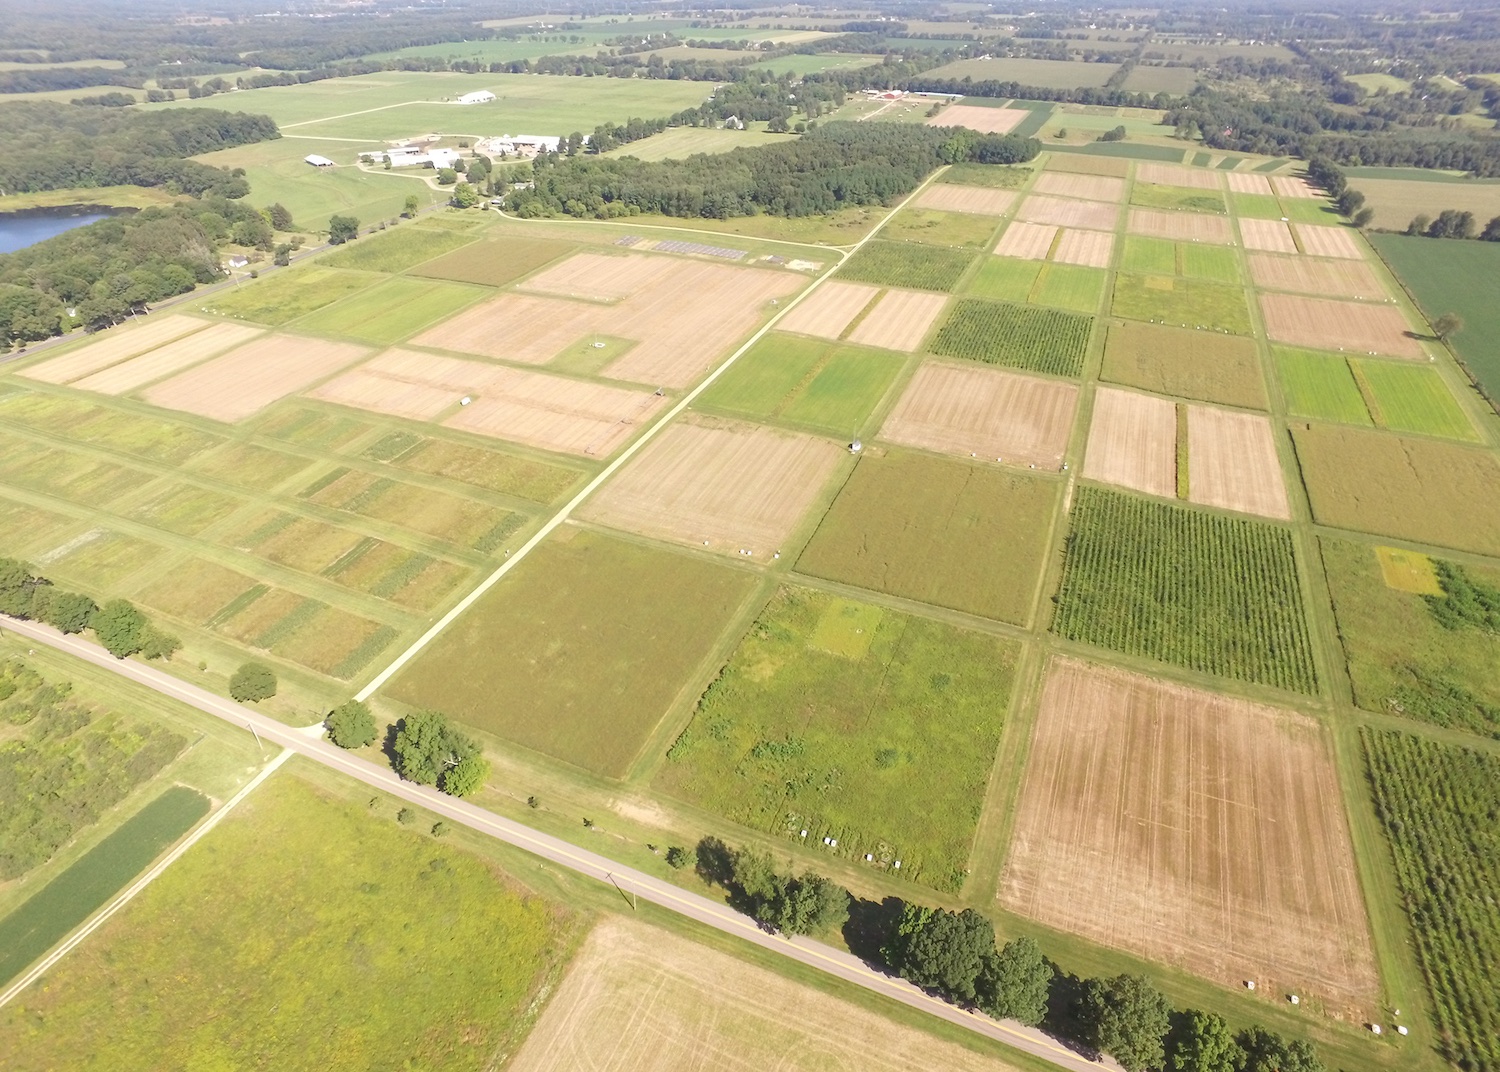 Drone image of the KBS LTER’s main cropping system experiment.